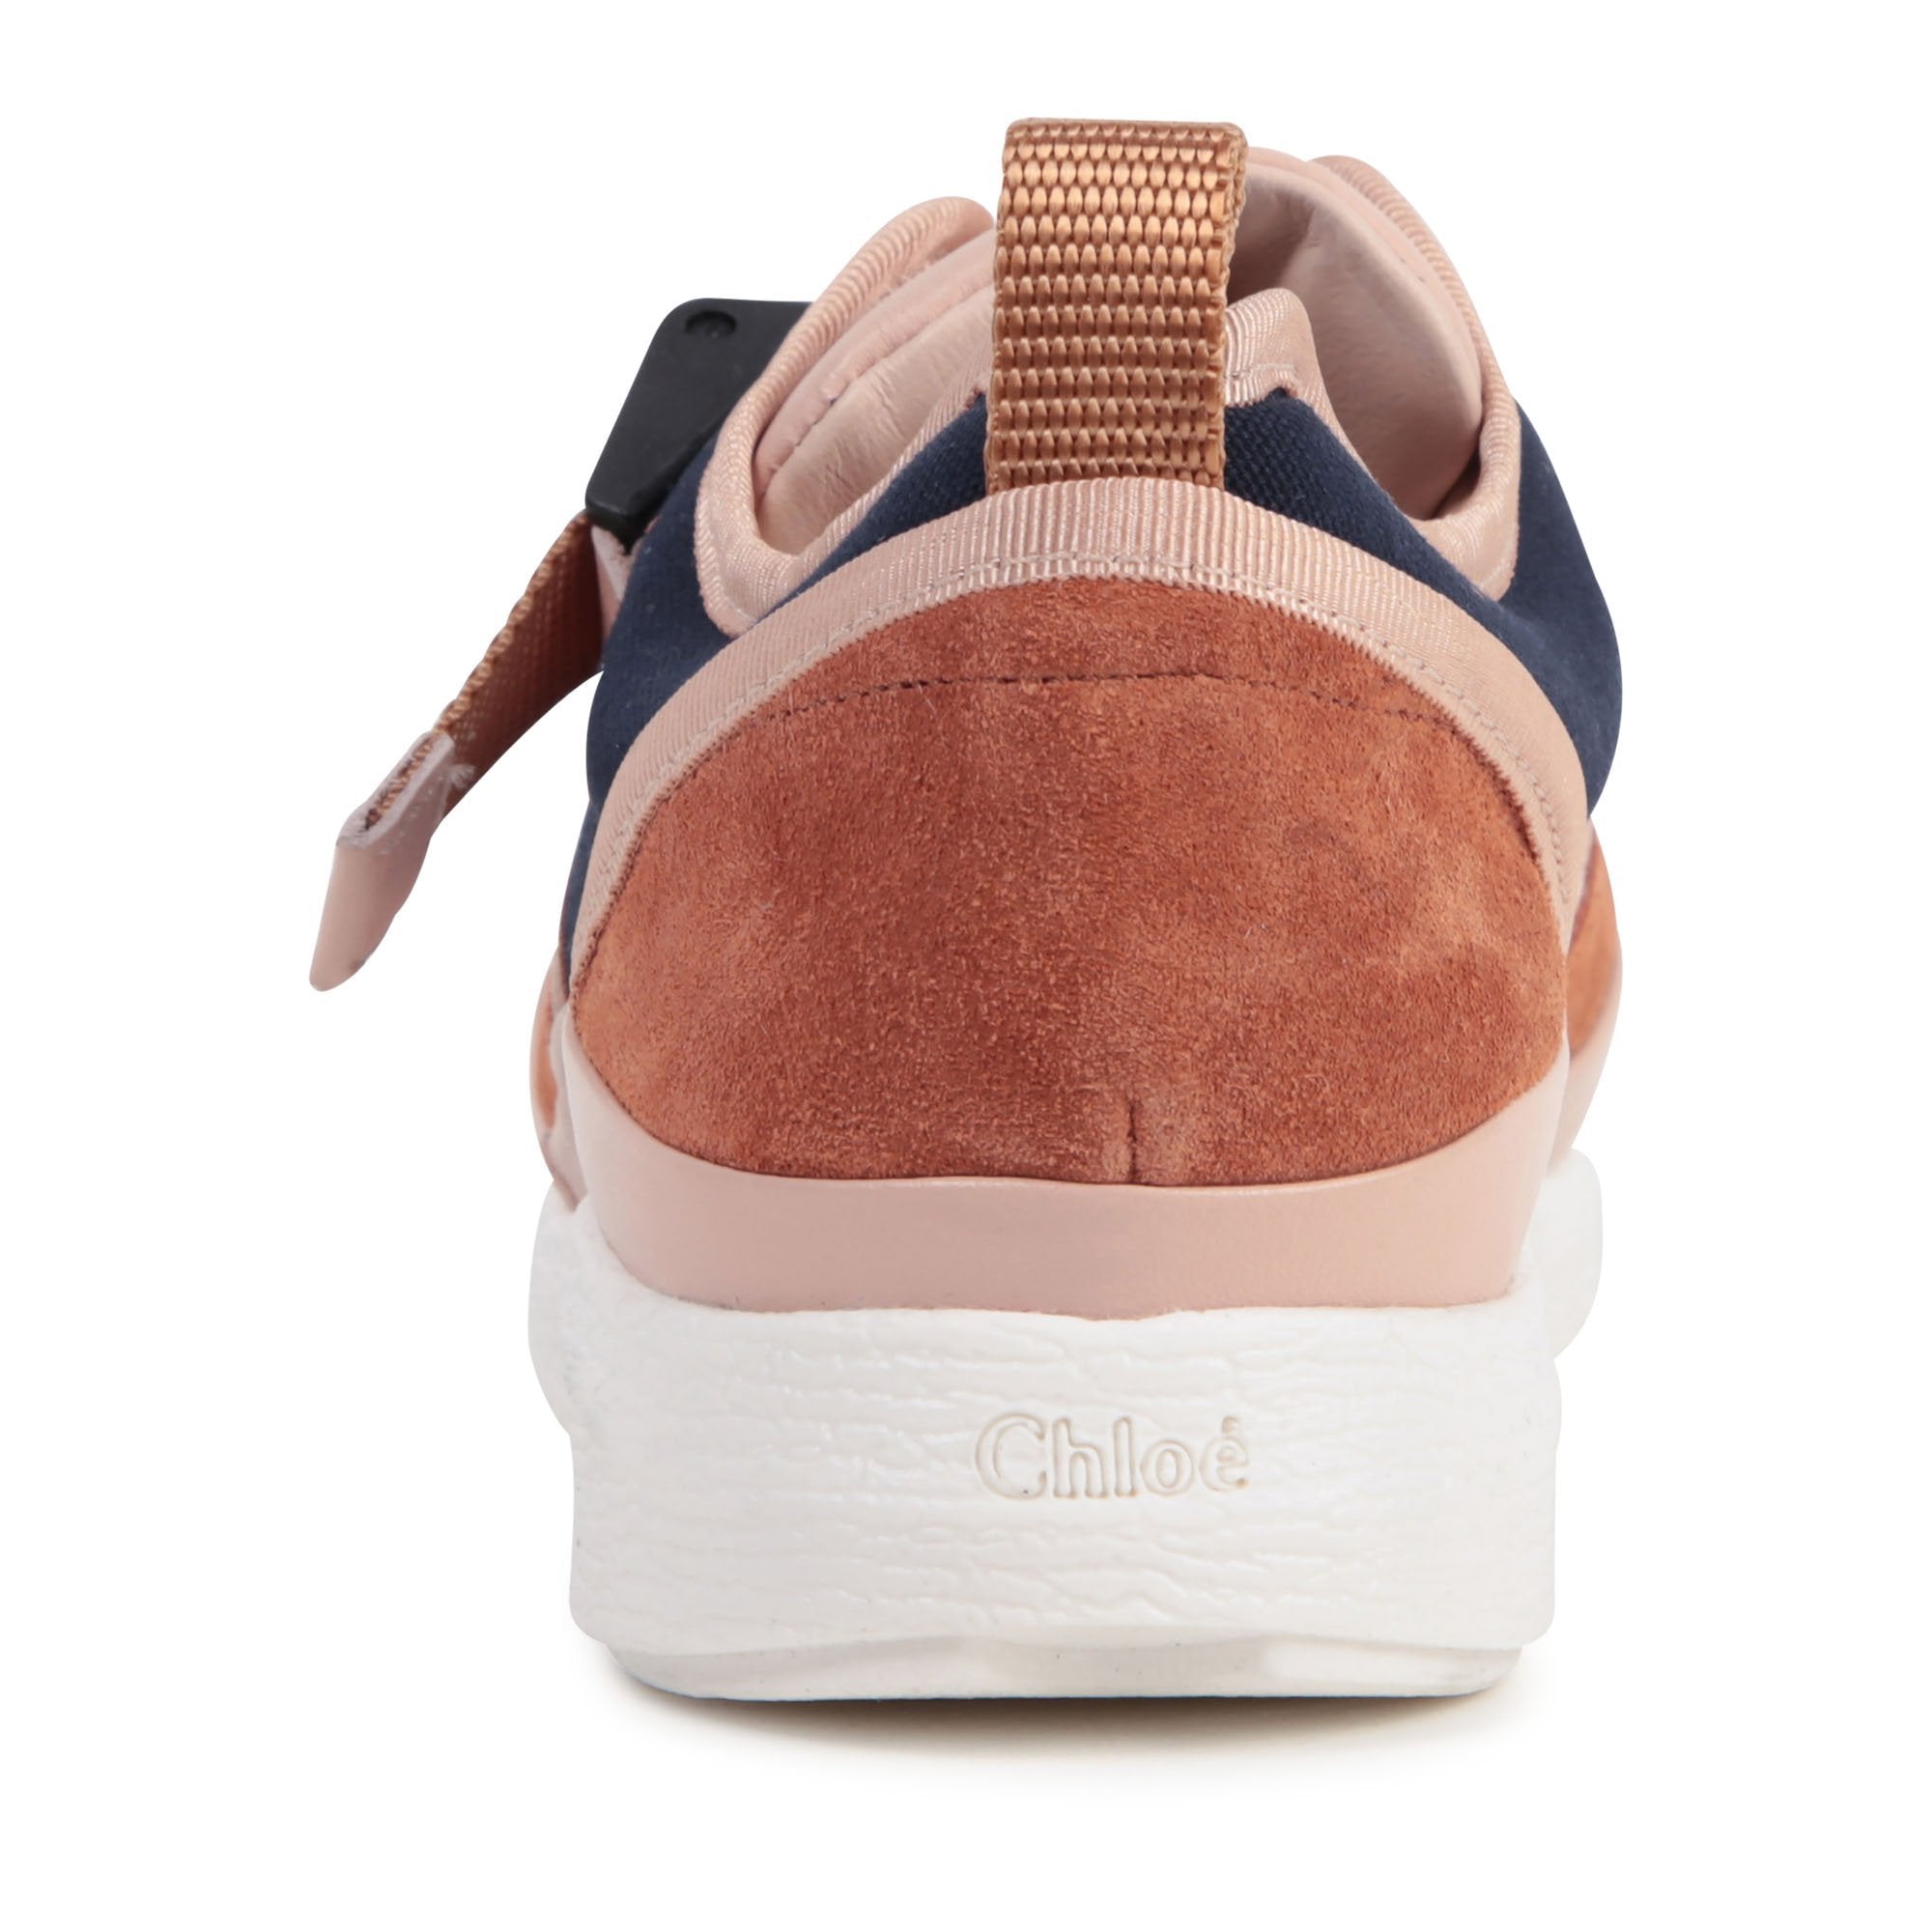 Chloe Girls Leather Trainers Pink